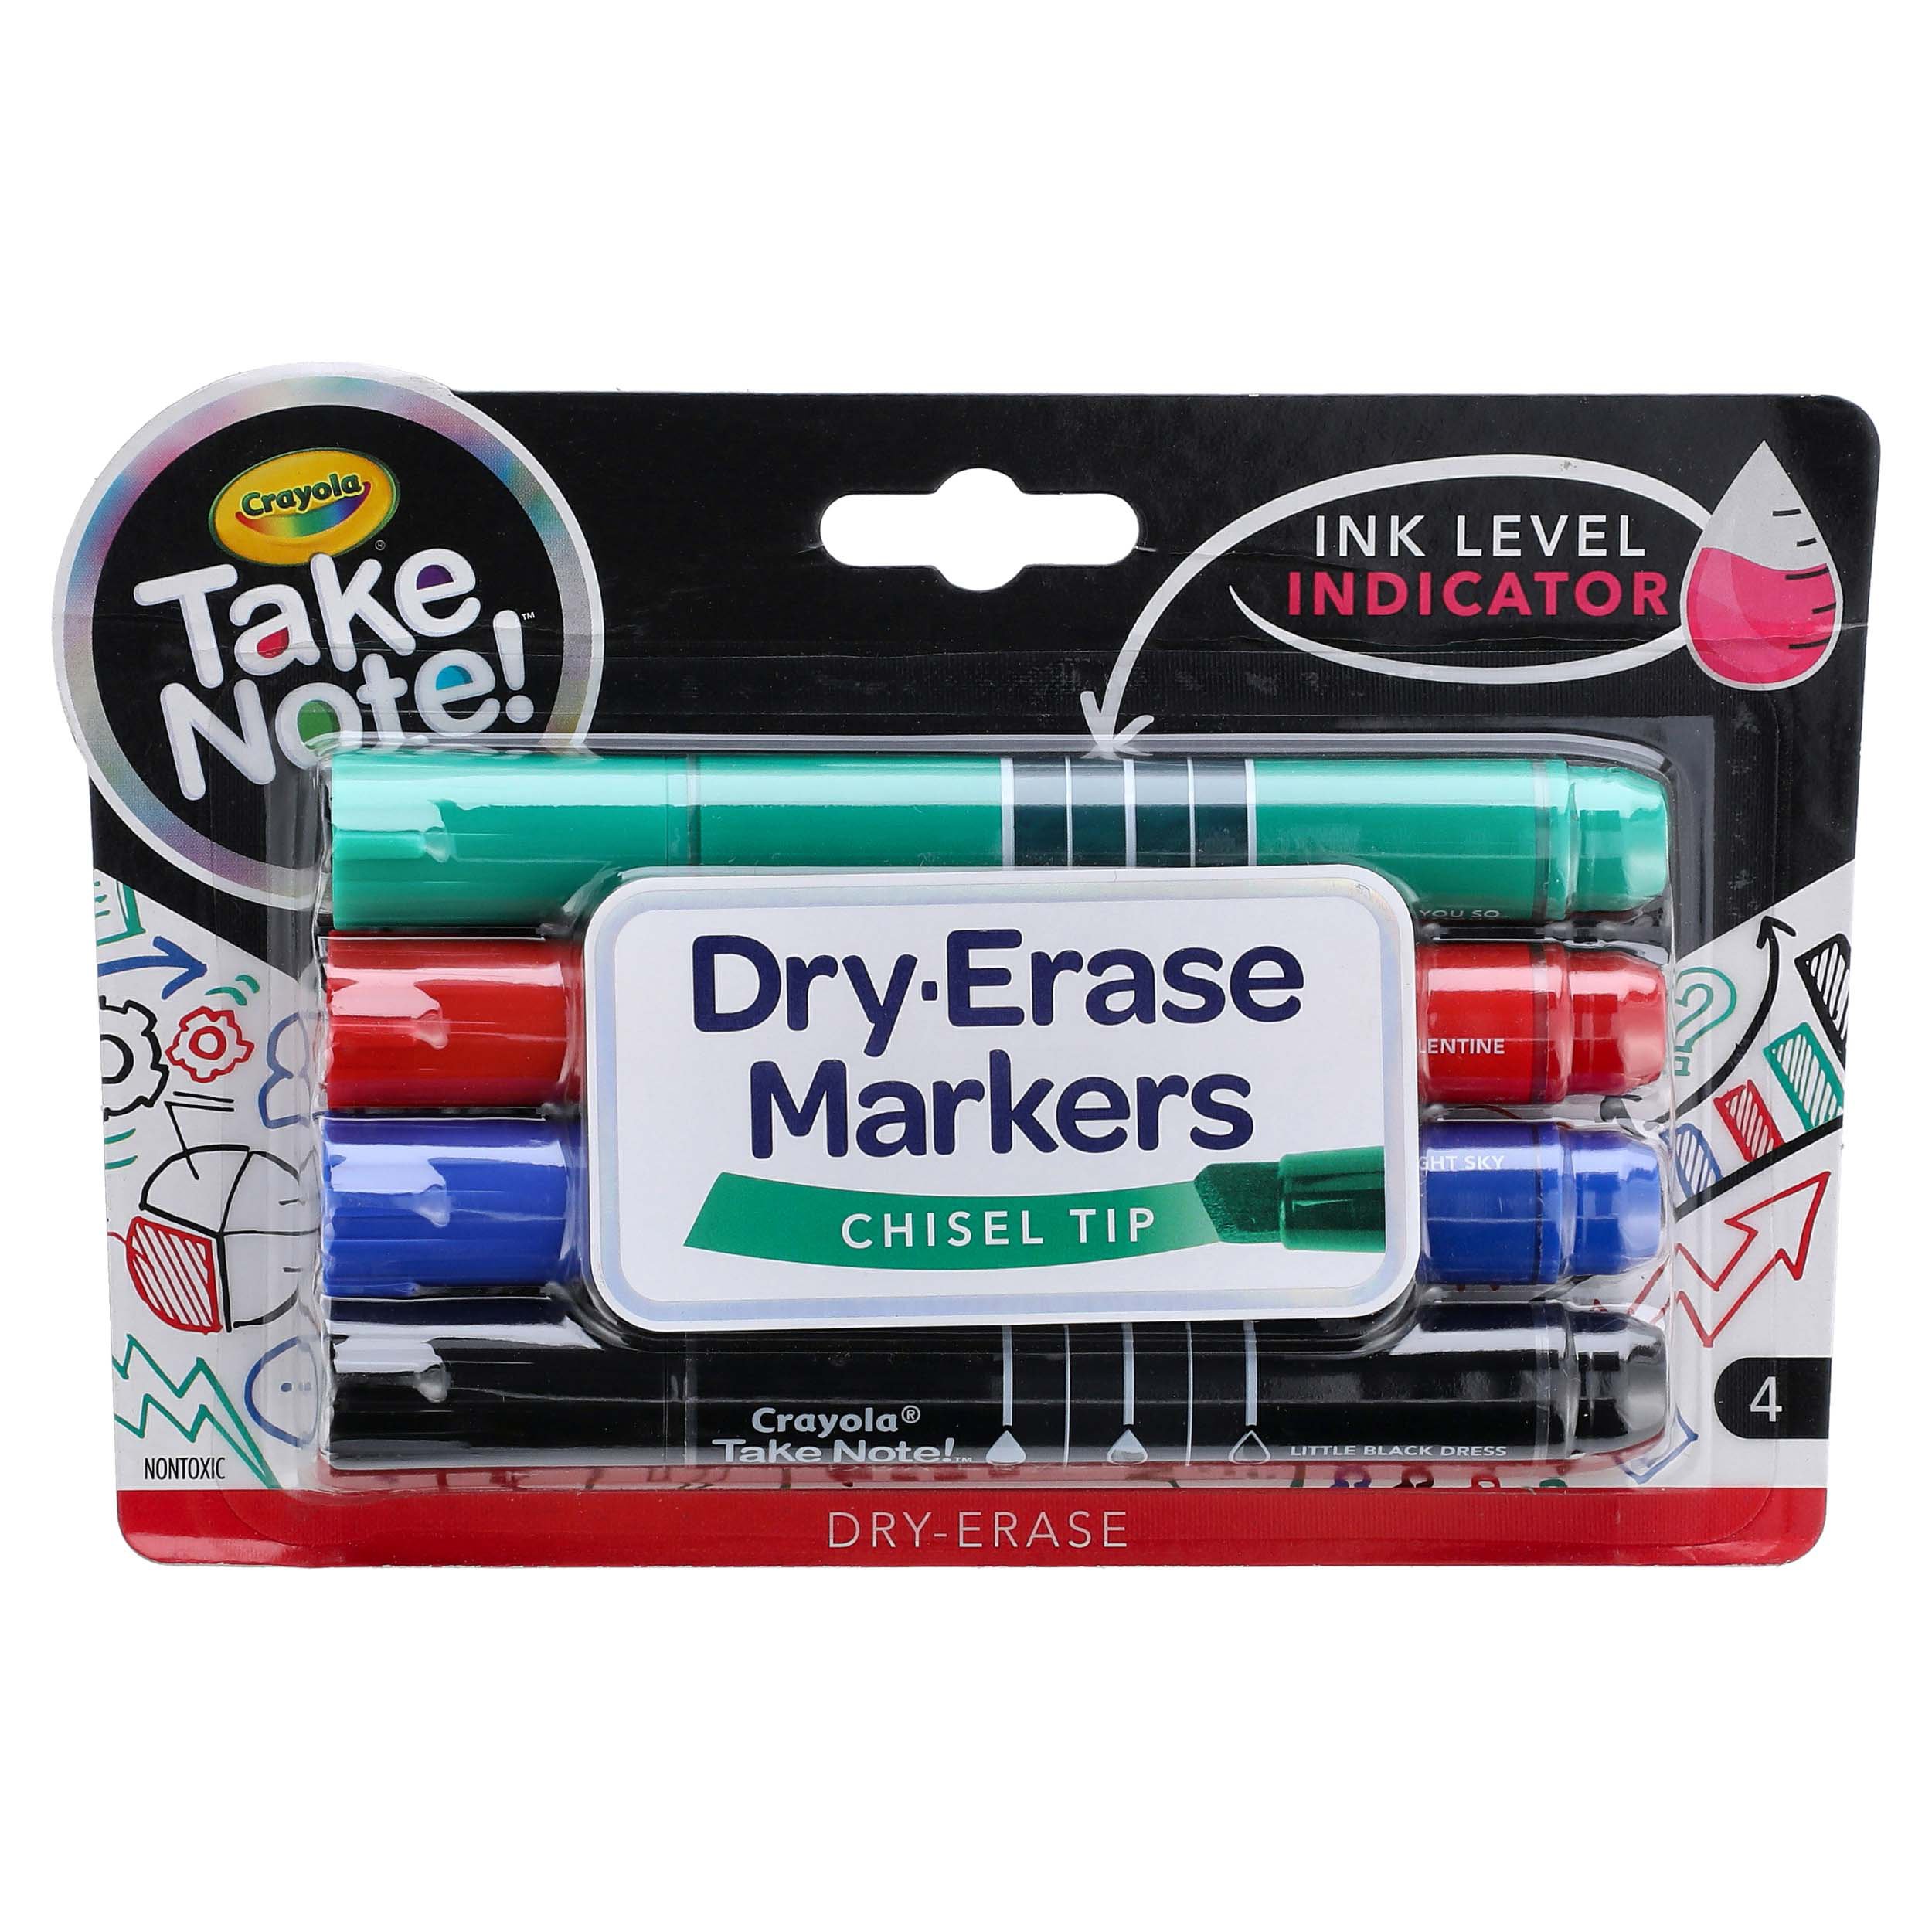 Crayola Take Note Dual End Highlighter Pens - Shop Highlighters & Dry-Erase  at H-E-B